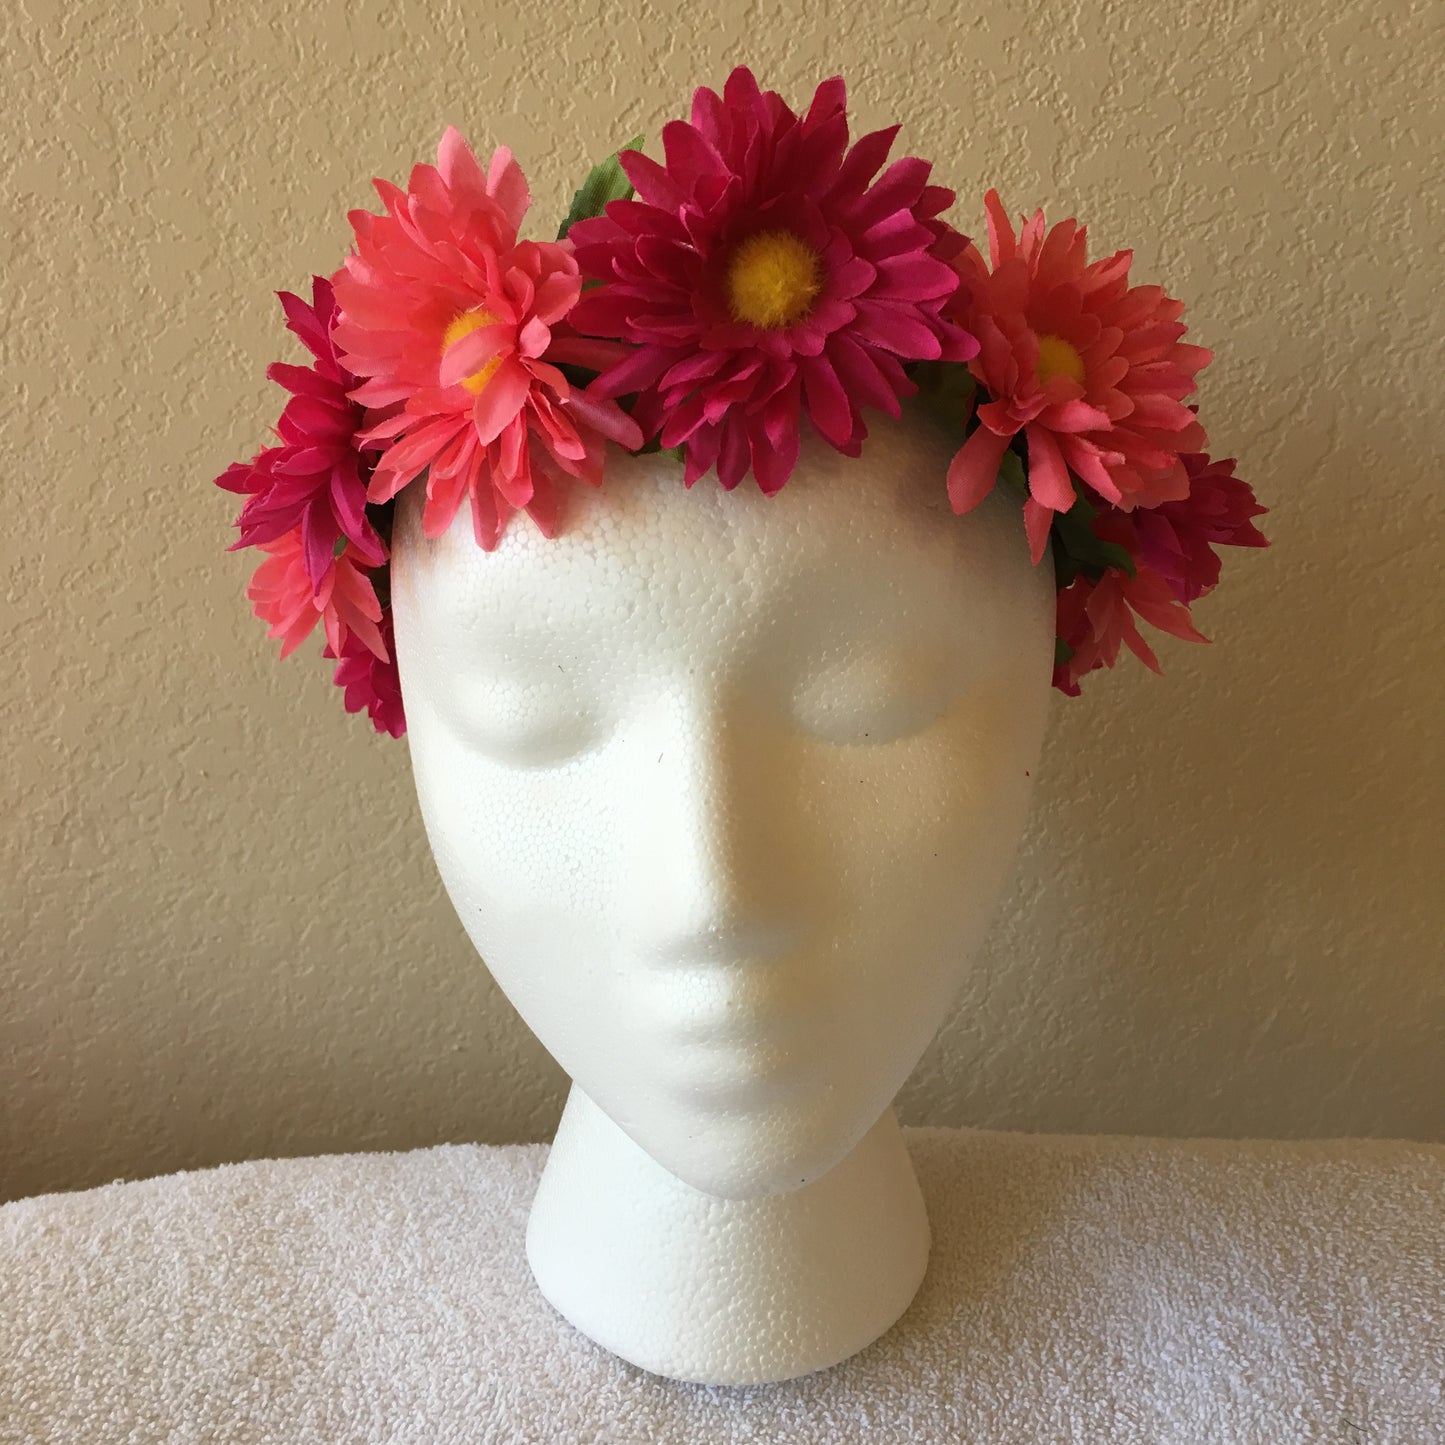 Small Wreath - Hot pink & light pink daisies